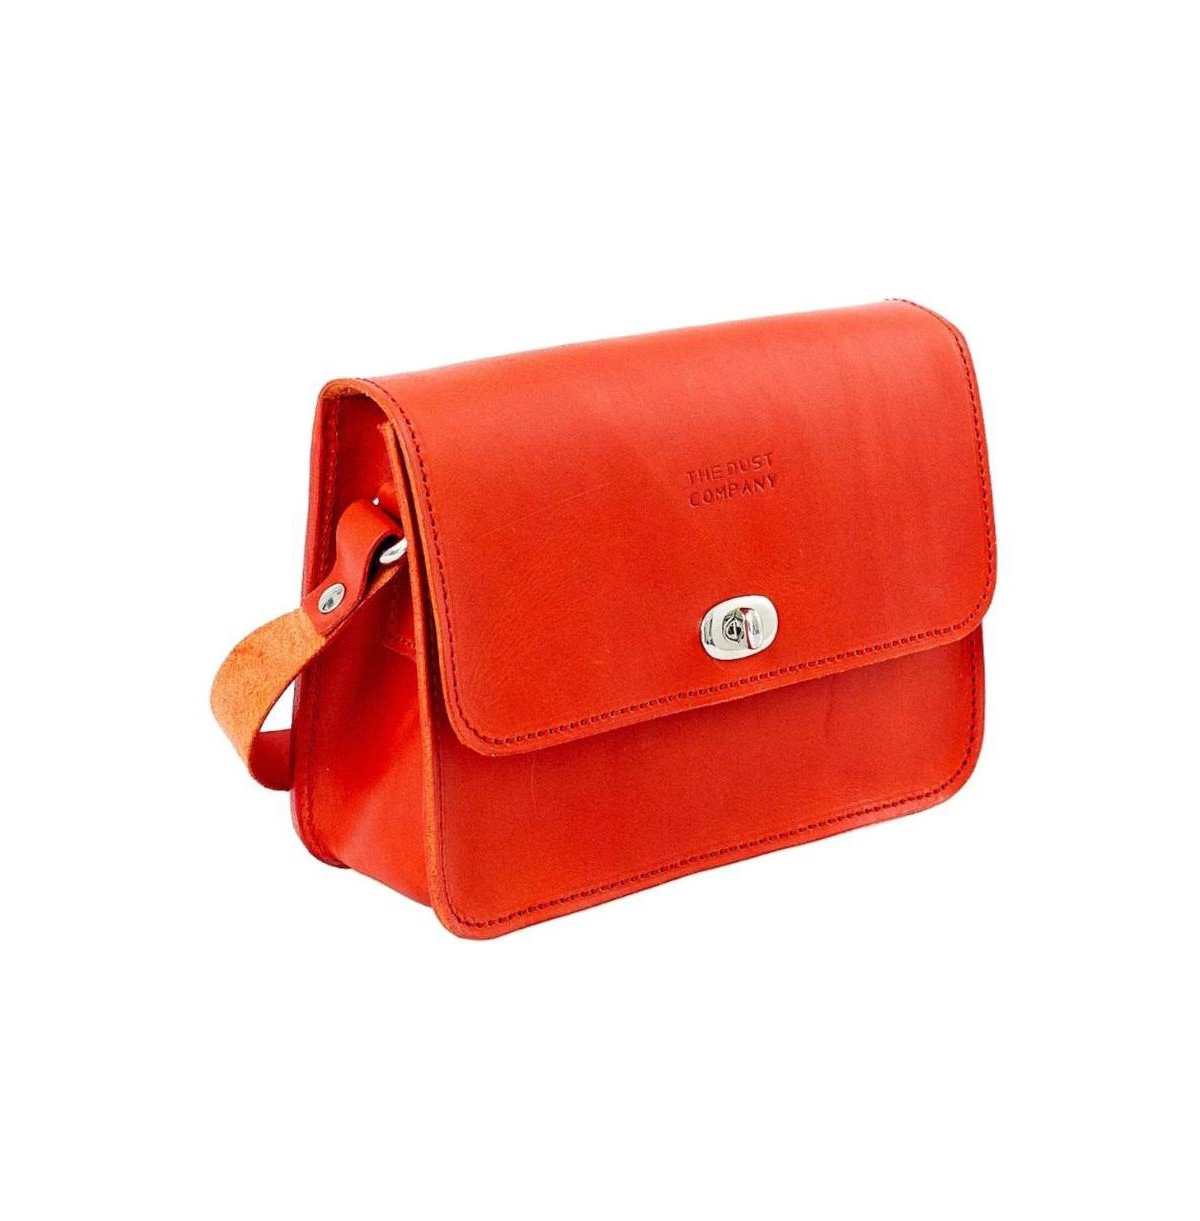 THE DUST COMPANY LEATHER CROSS BODY BAG